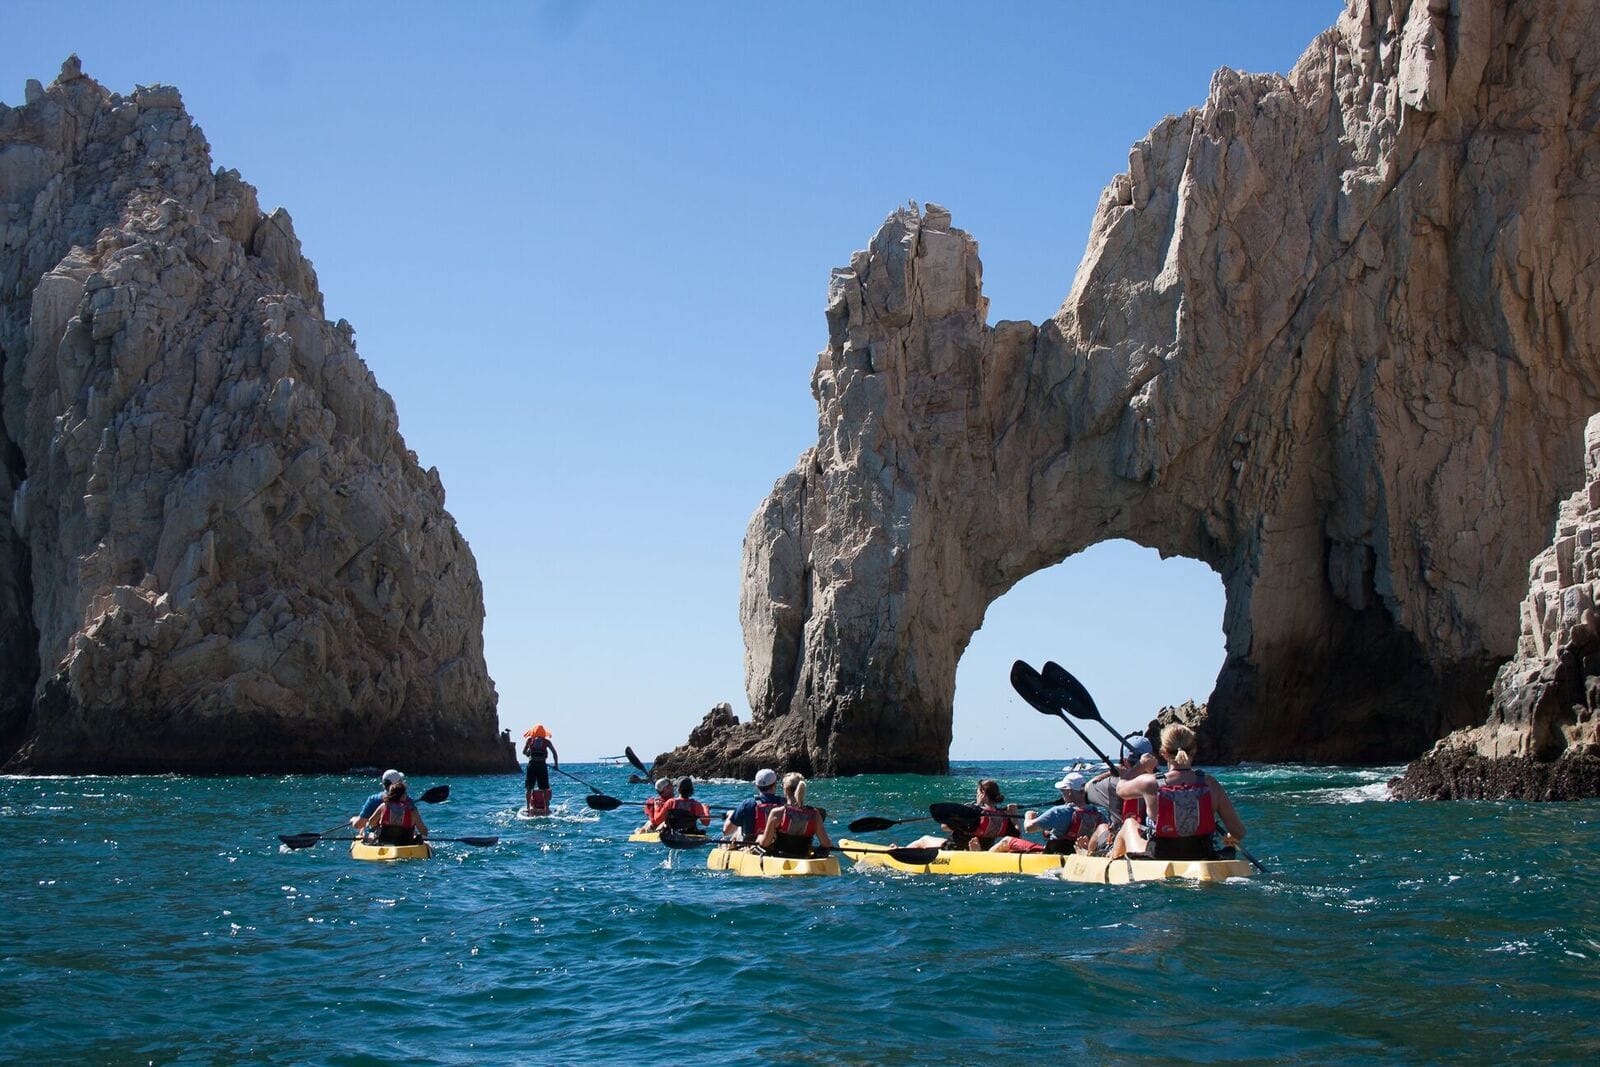 What To Do In Cabo?